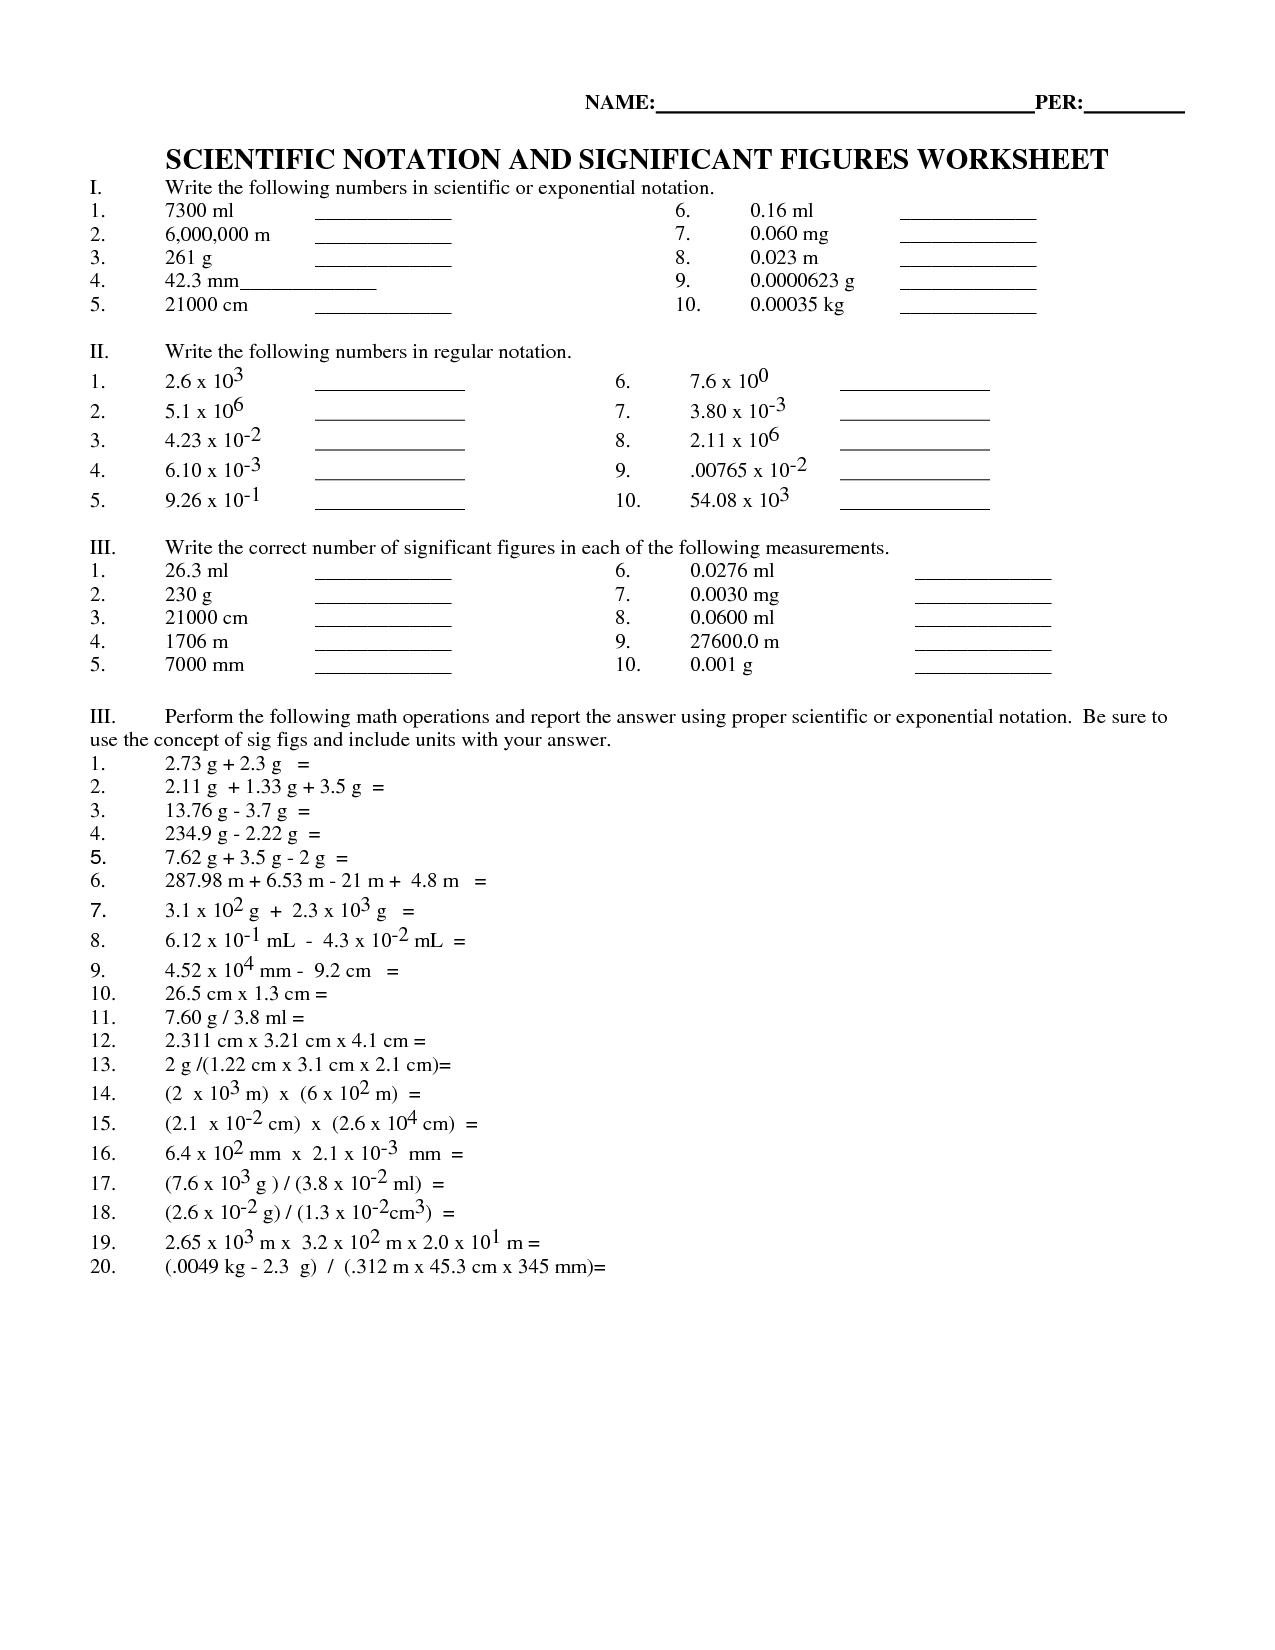 scientific-notation-and-significant-figures-worksheet-db-excel